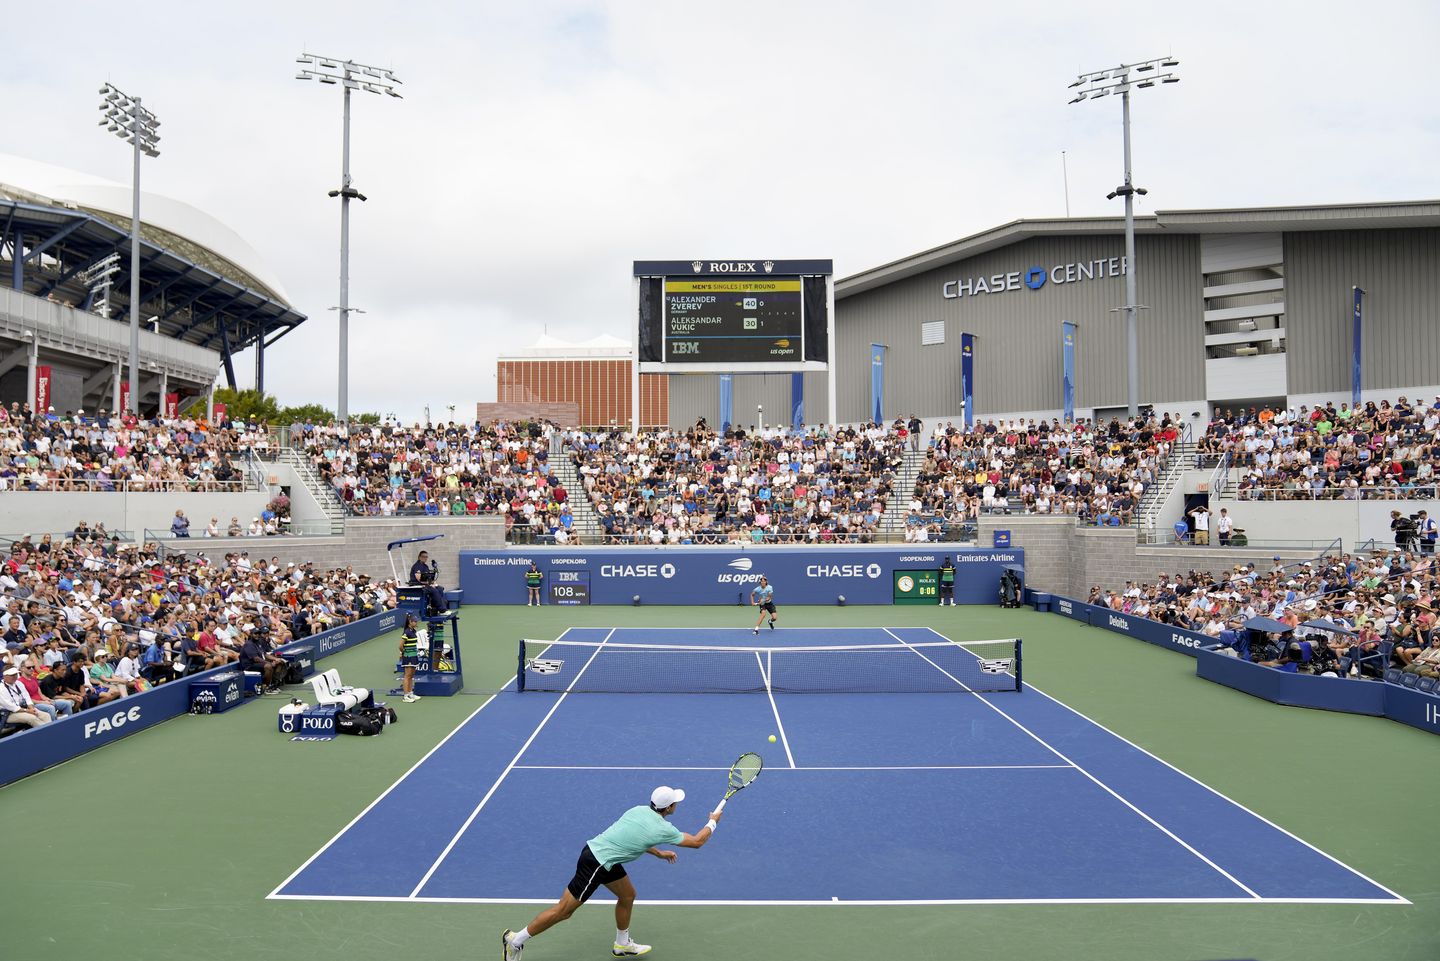 'Like Snoop Dogg's living room': Smell of pot wafts over notorious U.S. Open court #SnoopDogg